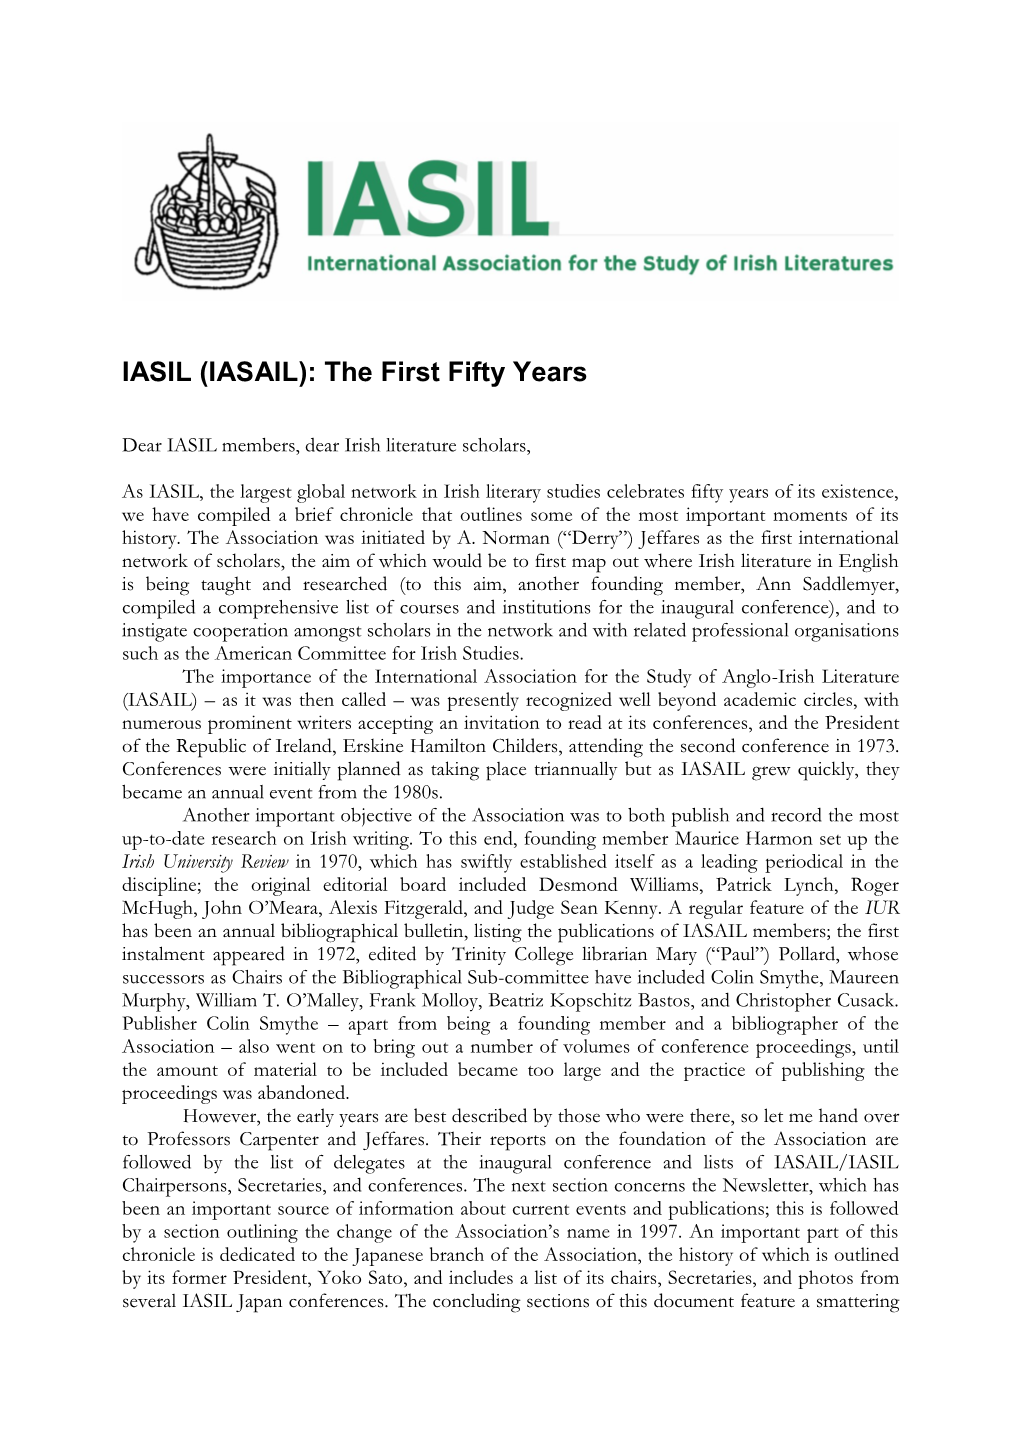 IASIL (IASAIL): the First Fifty Years